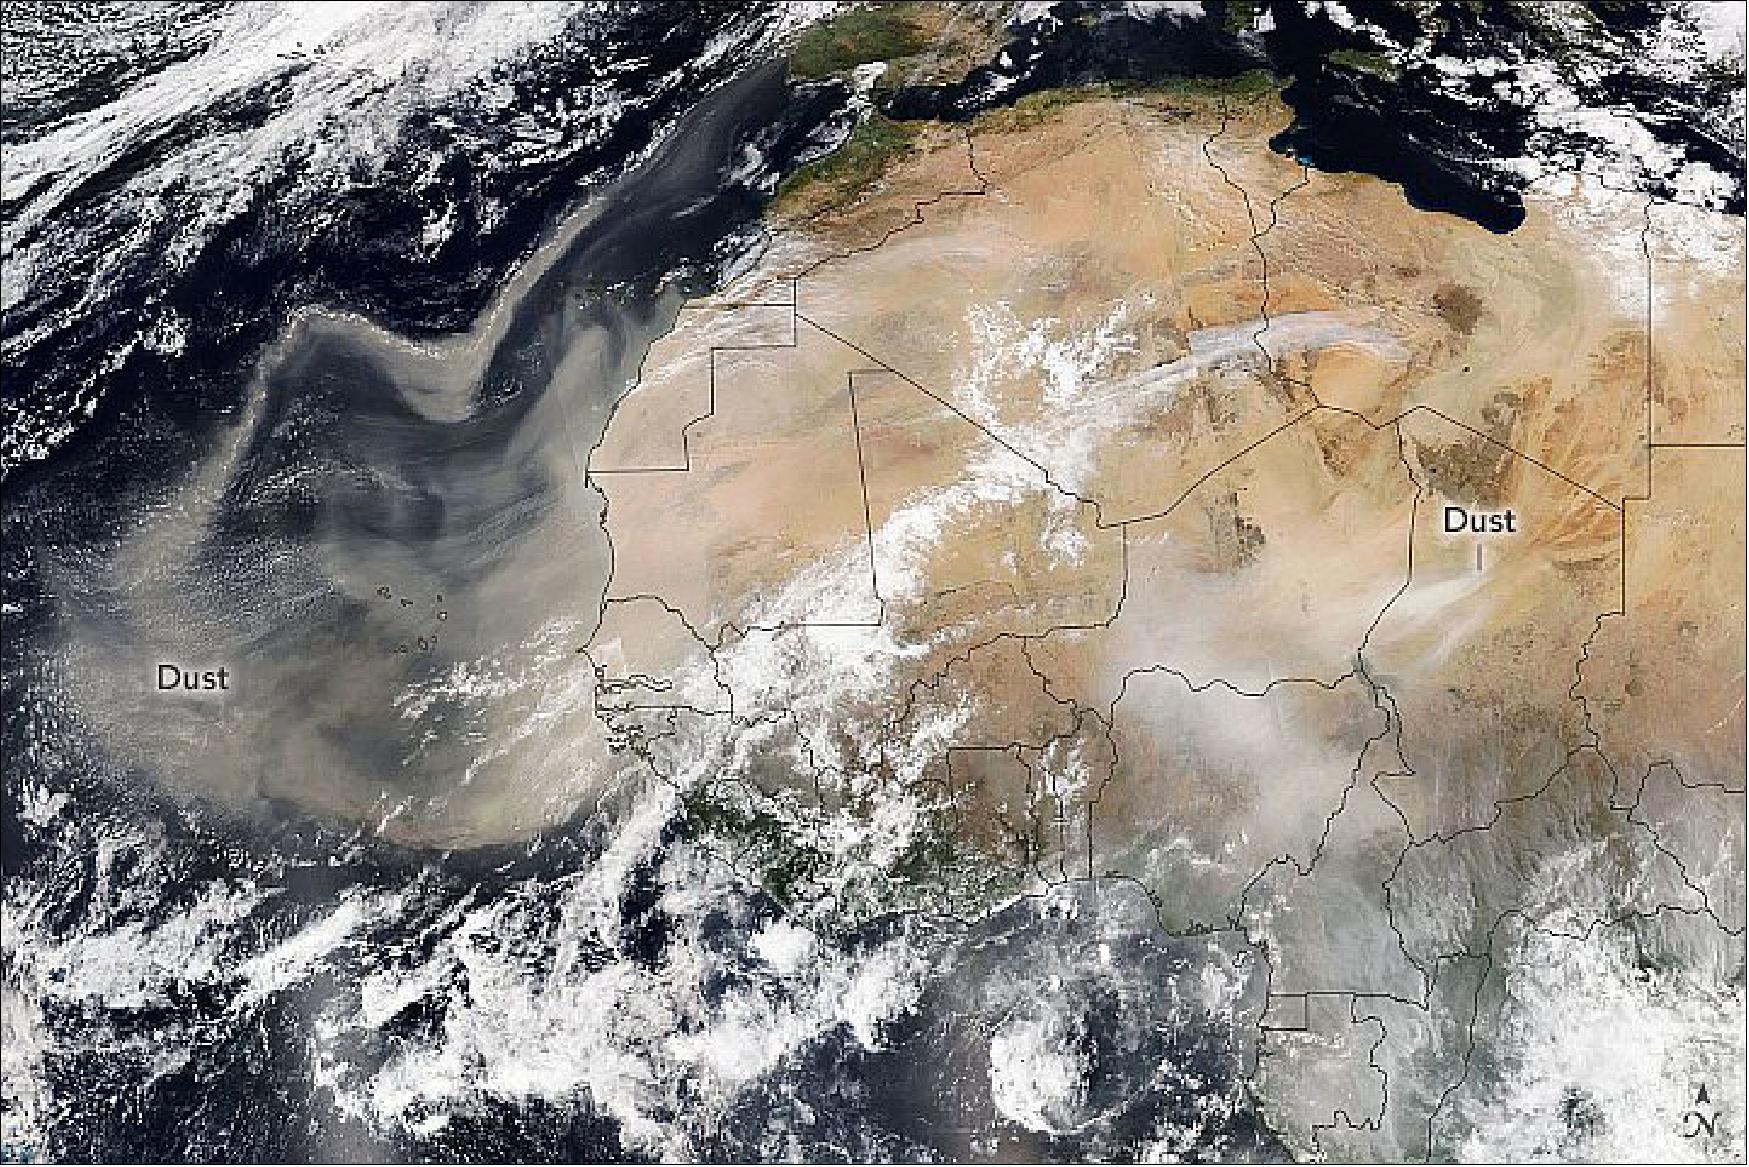 Figure 13: A dramatic display of airborne dust particles was observed on February 18, 2021, by the Visible Infrared Imaging Radiometer Suite (VIIRS) on the NOAA-20 spacecraft. The dust appears widespread, but particularly stirred up over the Bodélé Depression in northeastern Chad (image credit: NASA Earth Observatory image by Lauren Dauphin, using VIIRS data from NASA EOSDIS LANCE, GIBS/Worldview, and the Suomi National Polar-orbiting Partnership. Story by Kathryn Hansen)